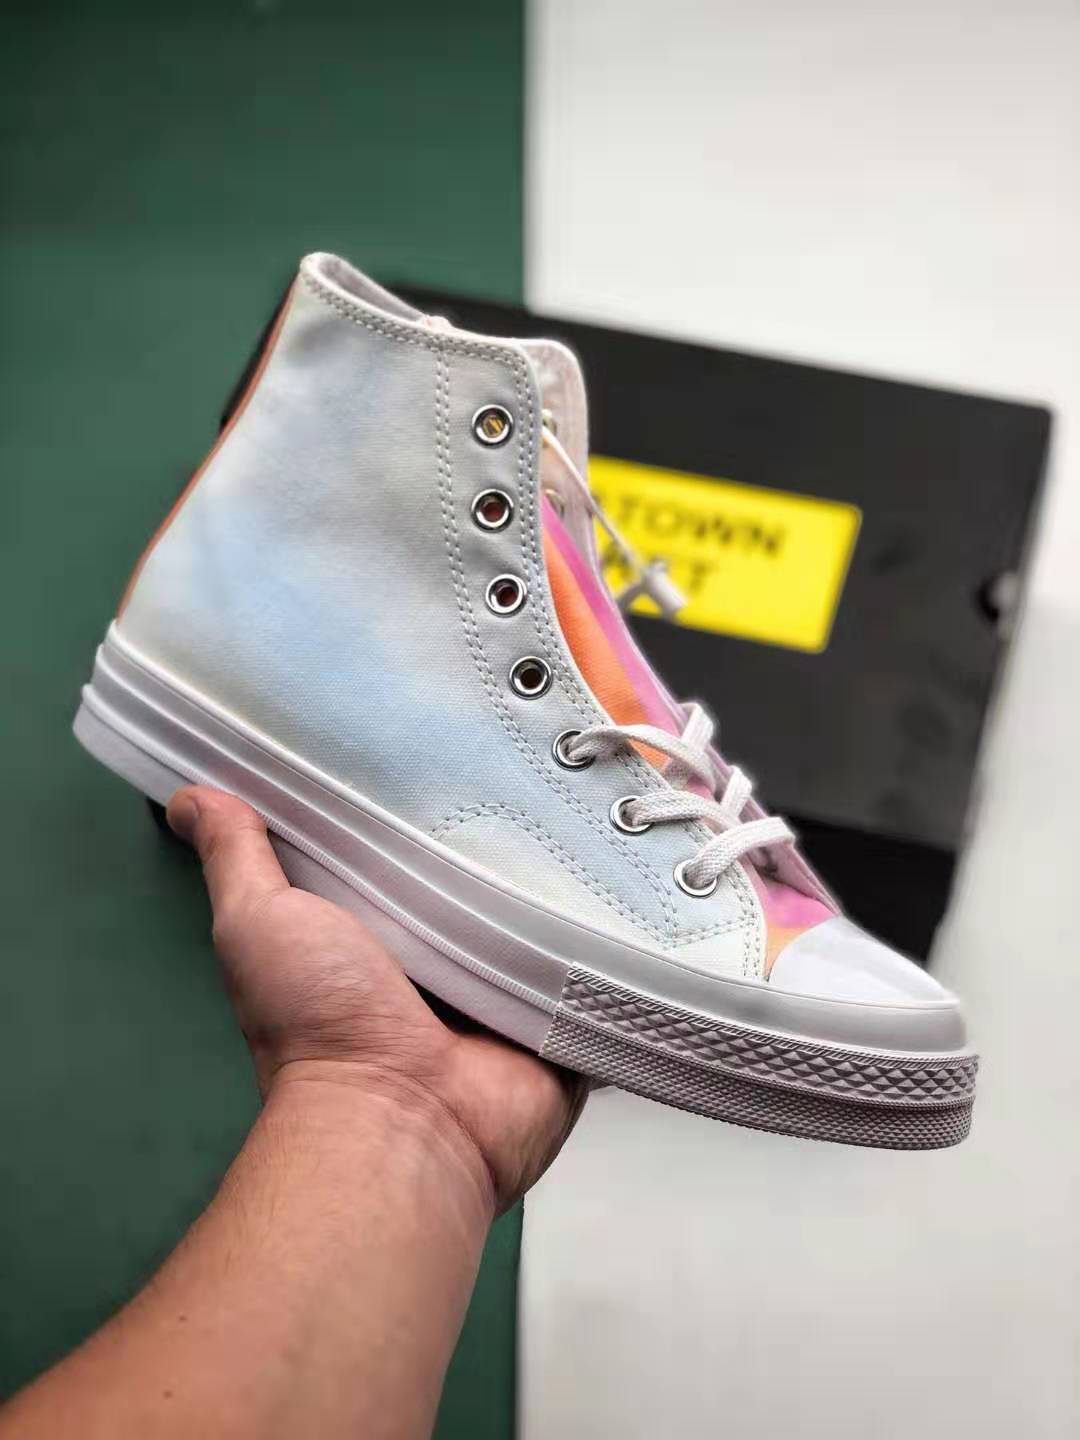 Converse Chinatown Market x Chuck 70 High 'UV' 166598C - Limited Edition Streetwear Sneakers